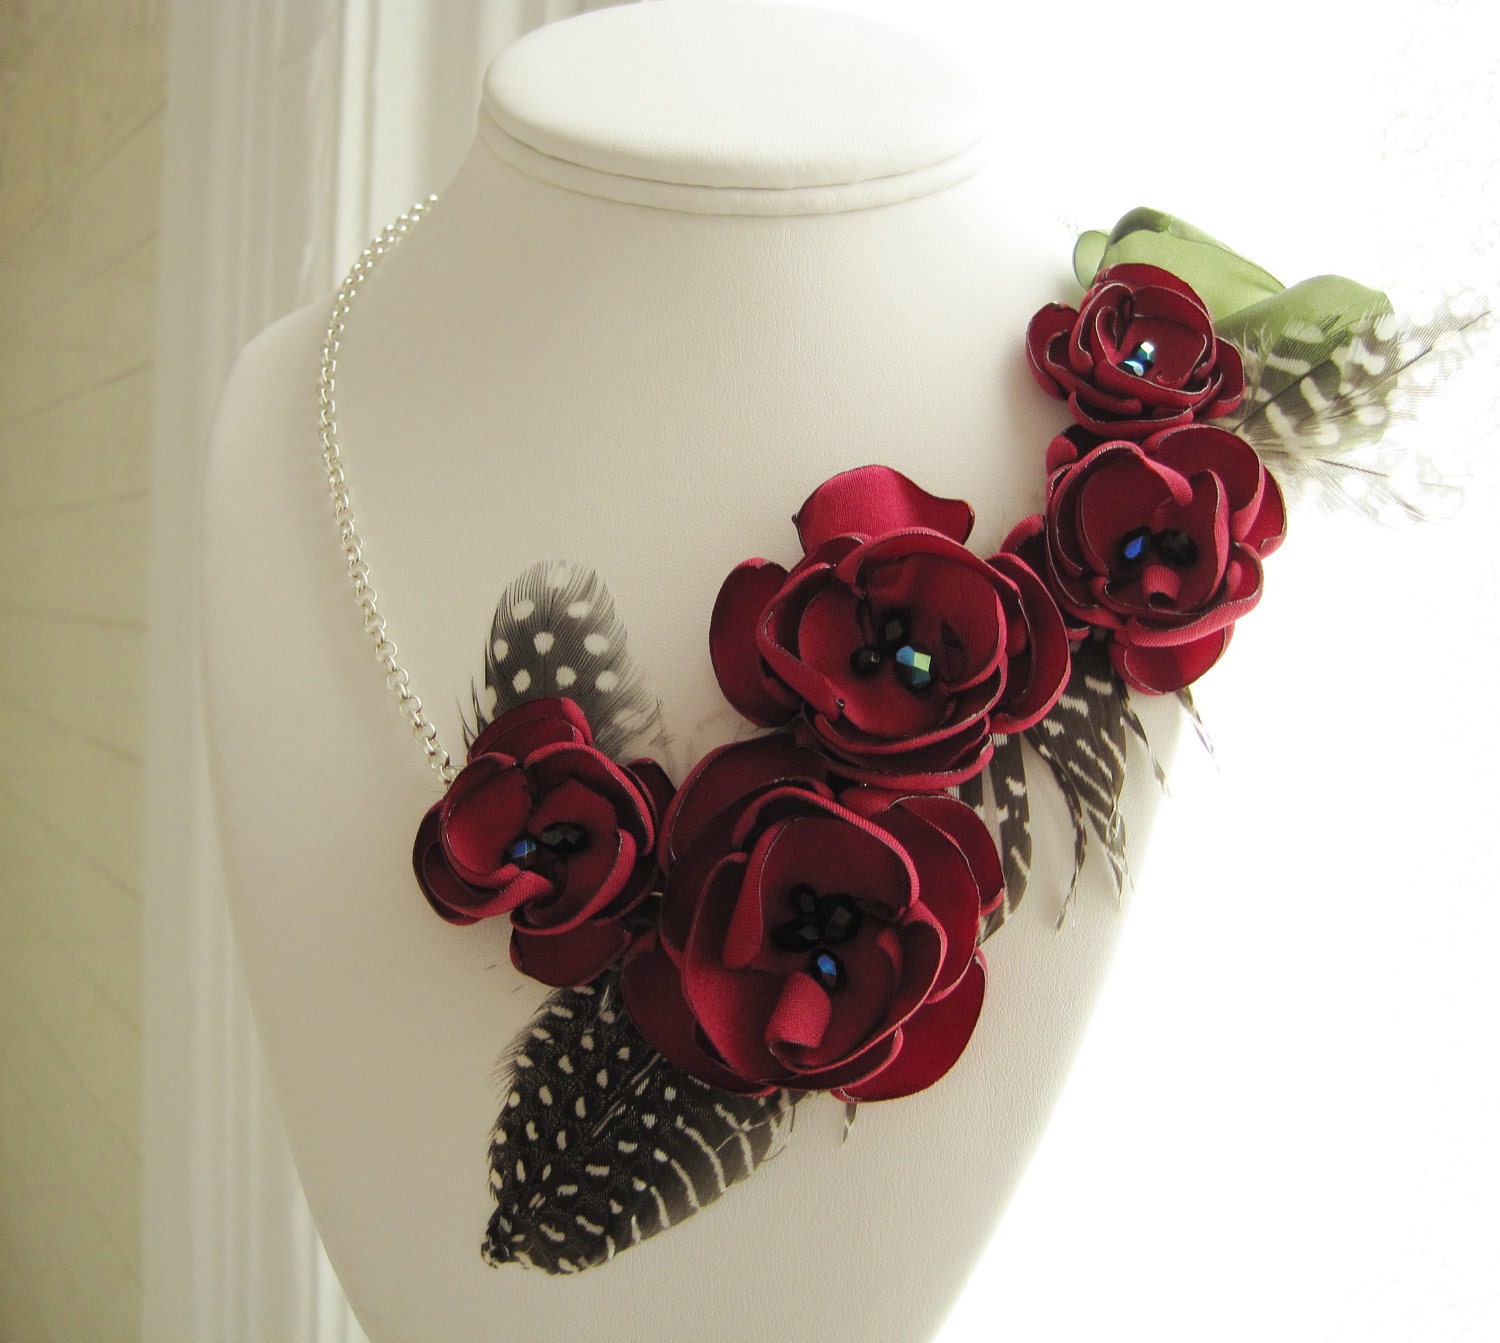 fabric flower necklace asymmetrical by MariaLouiseHightoo on Etsy